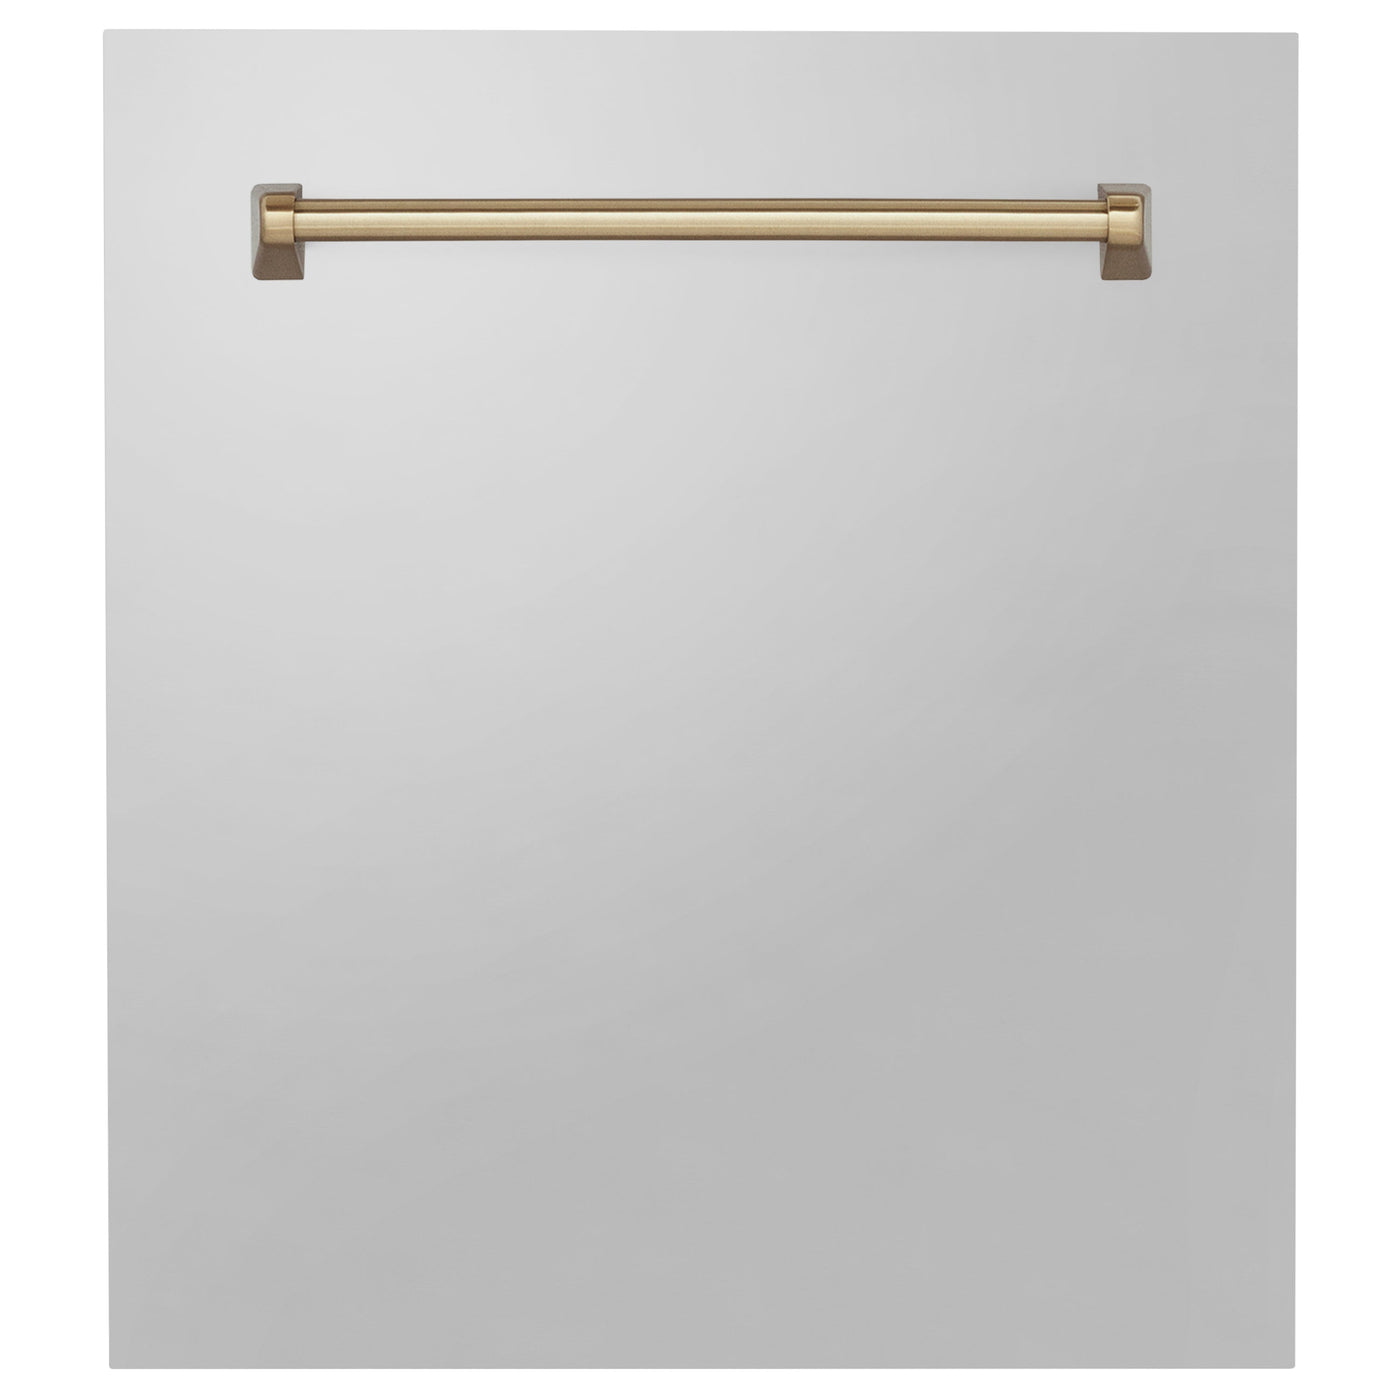 ZLINE 24" Autograph Edition Tallac Dishwasher Panel in Stainless Steel with Champagne Bronze Handle (DPVZ-304-24-CB)